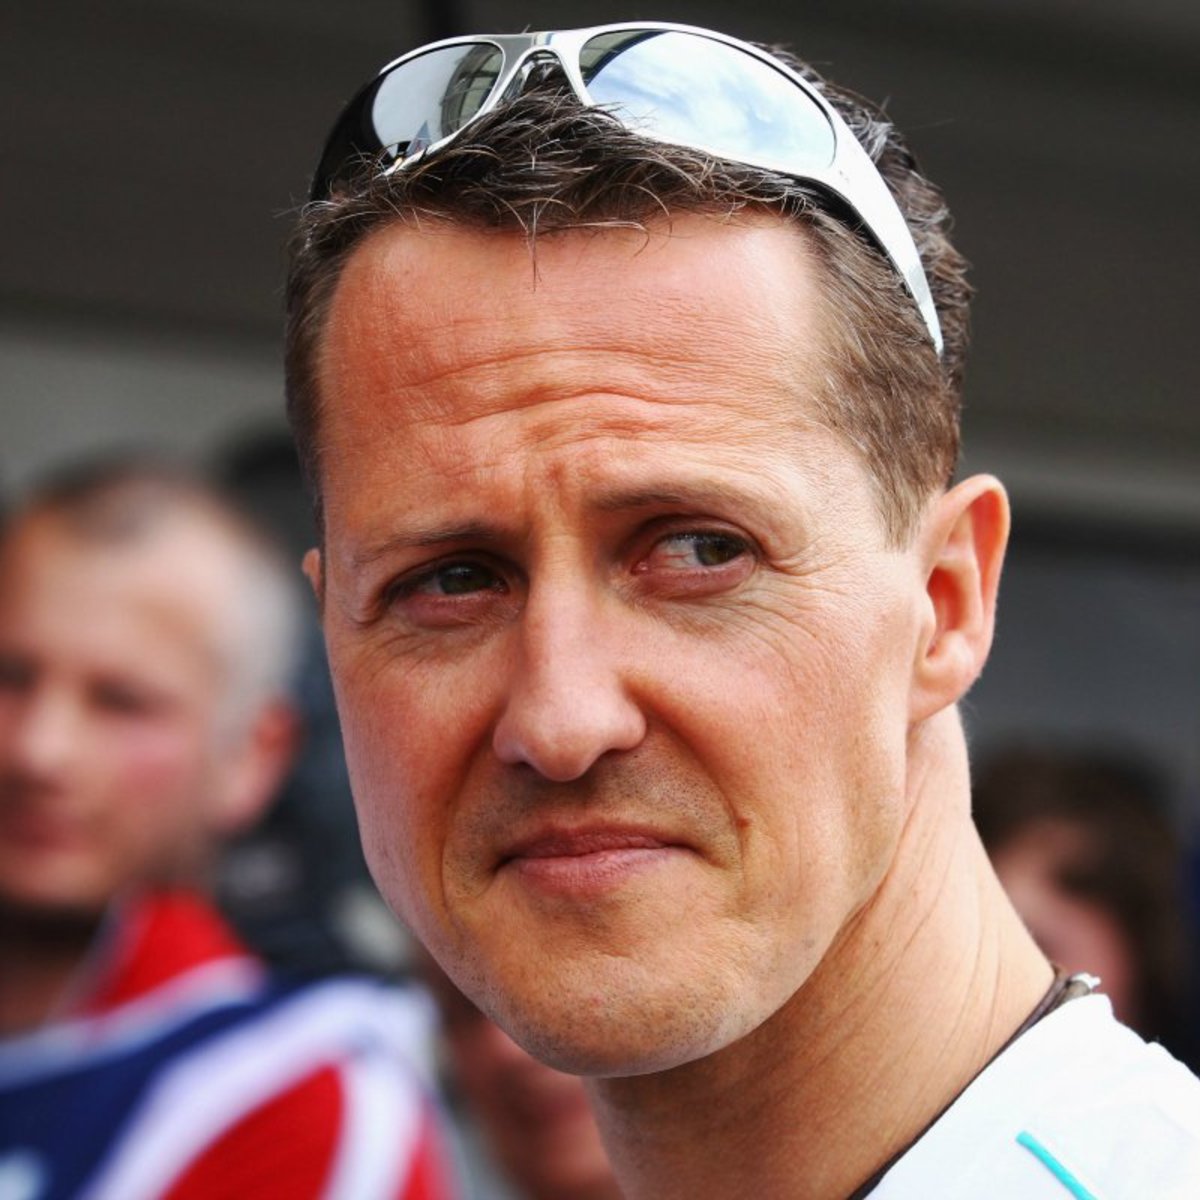 Michael Schumacher Now: A Comprehensive Update on His Condition and Legacy